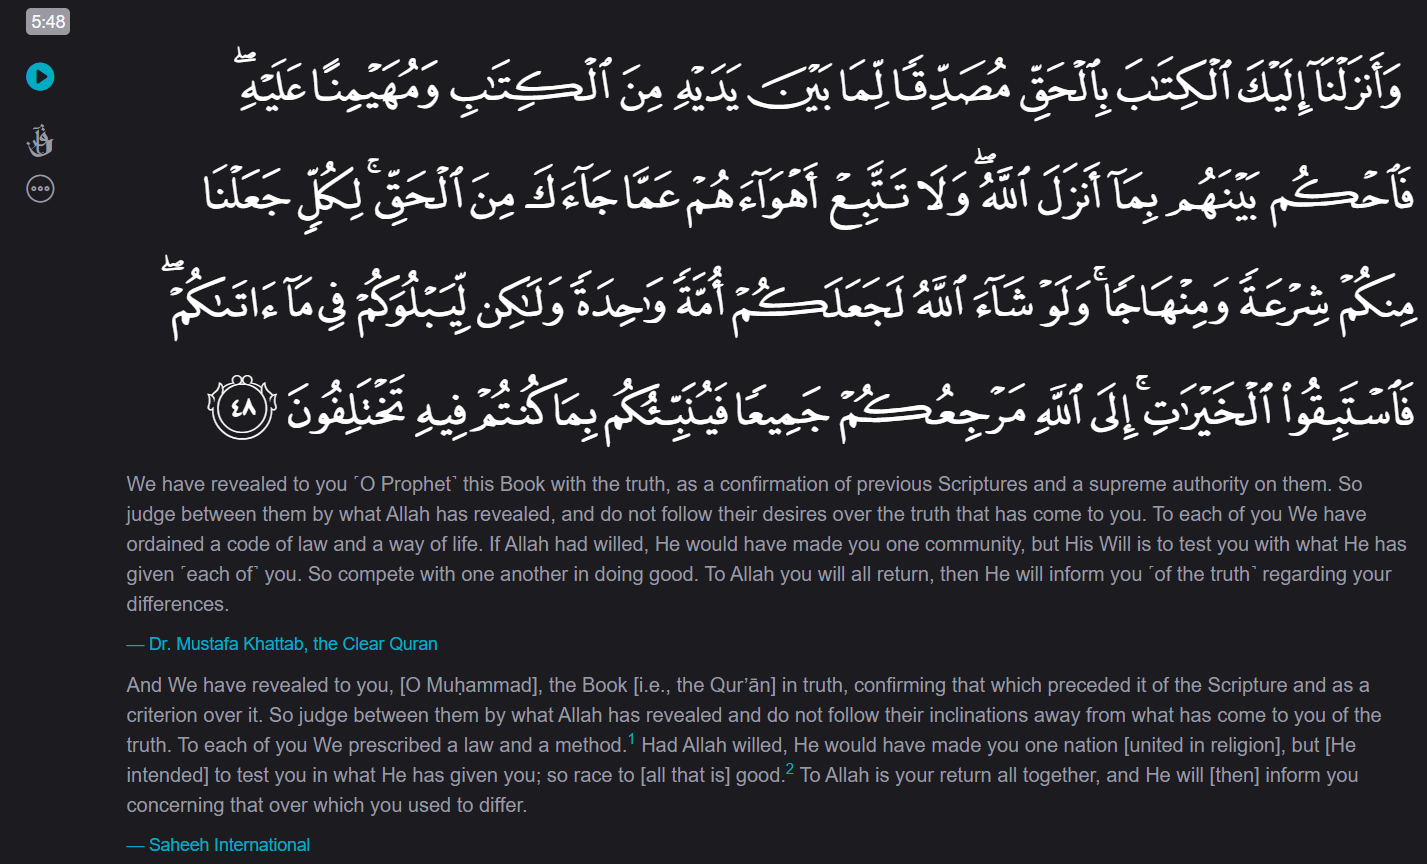 How the Bible got Horribly Corrupted. The Competition of Muhammad